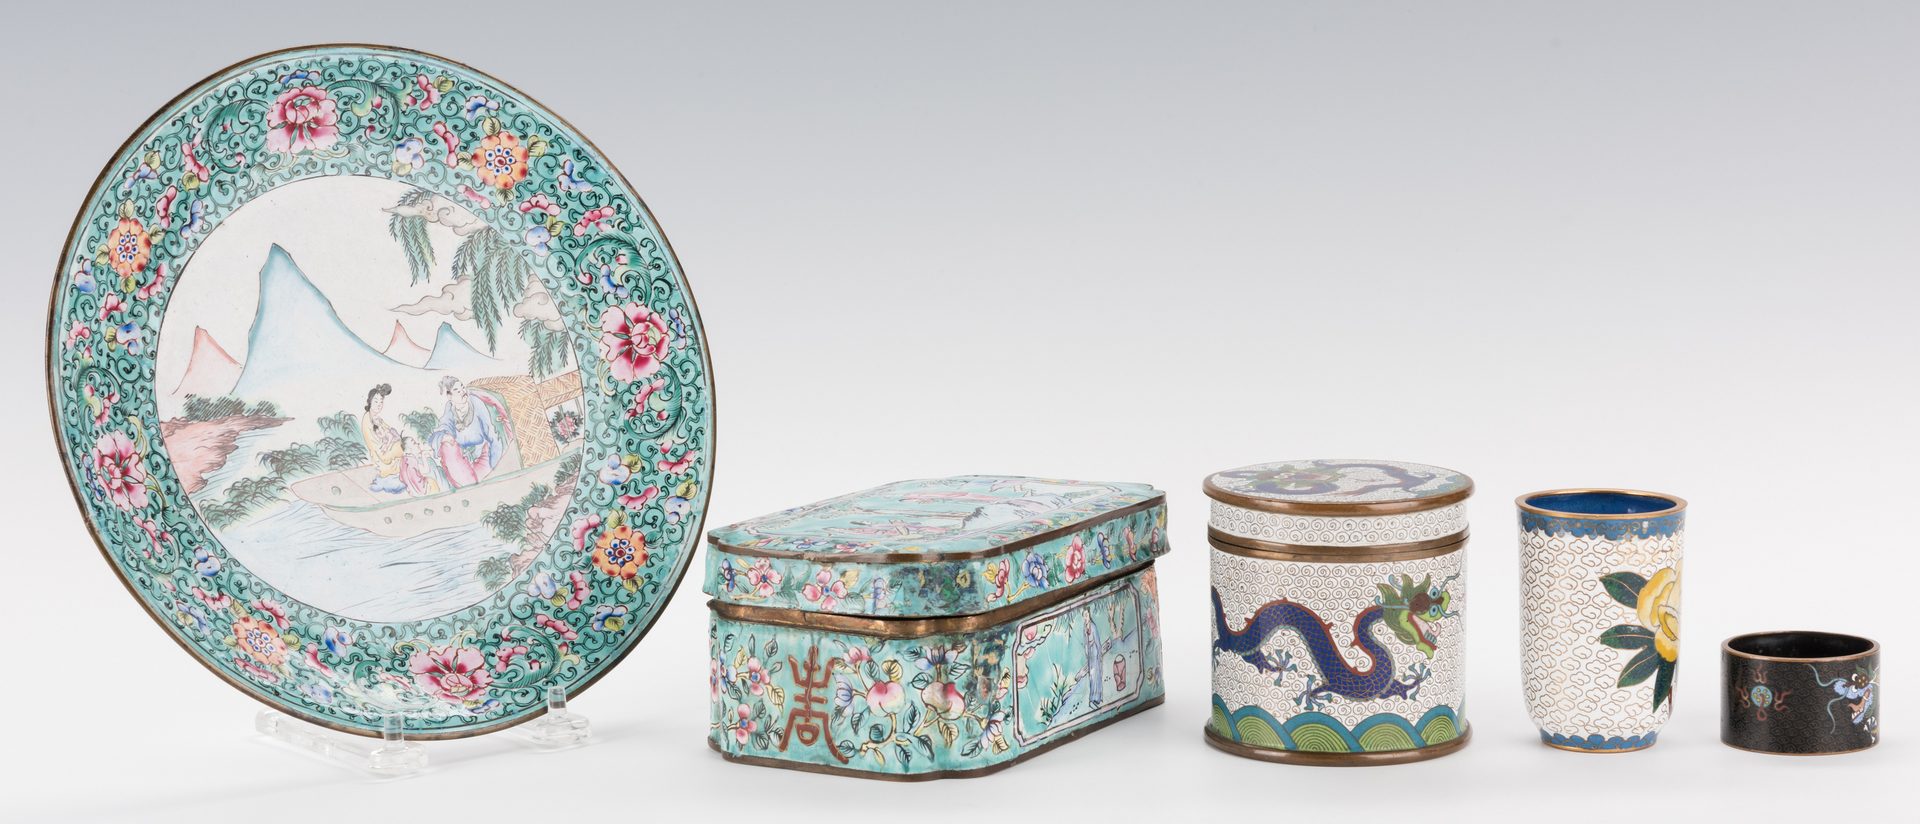 Lot 207: 5 Pcs. Chinese Cloisonne & Enameled Table Items